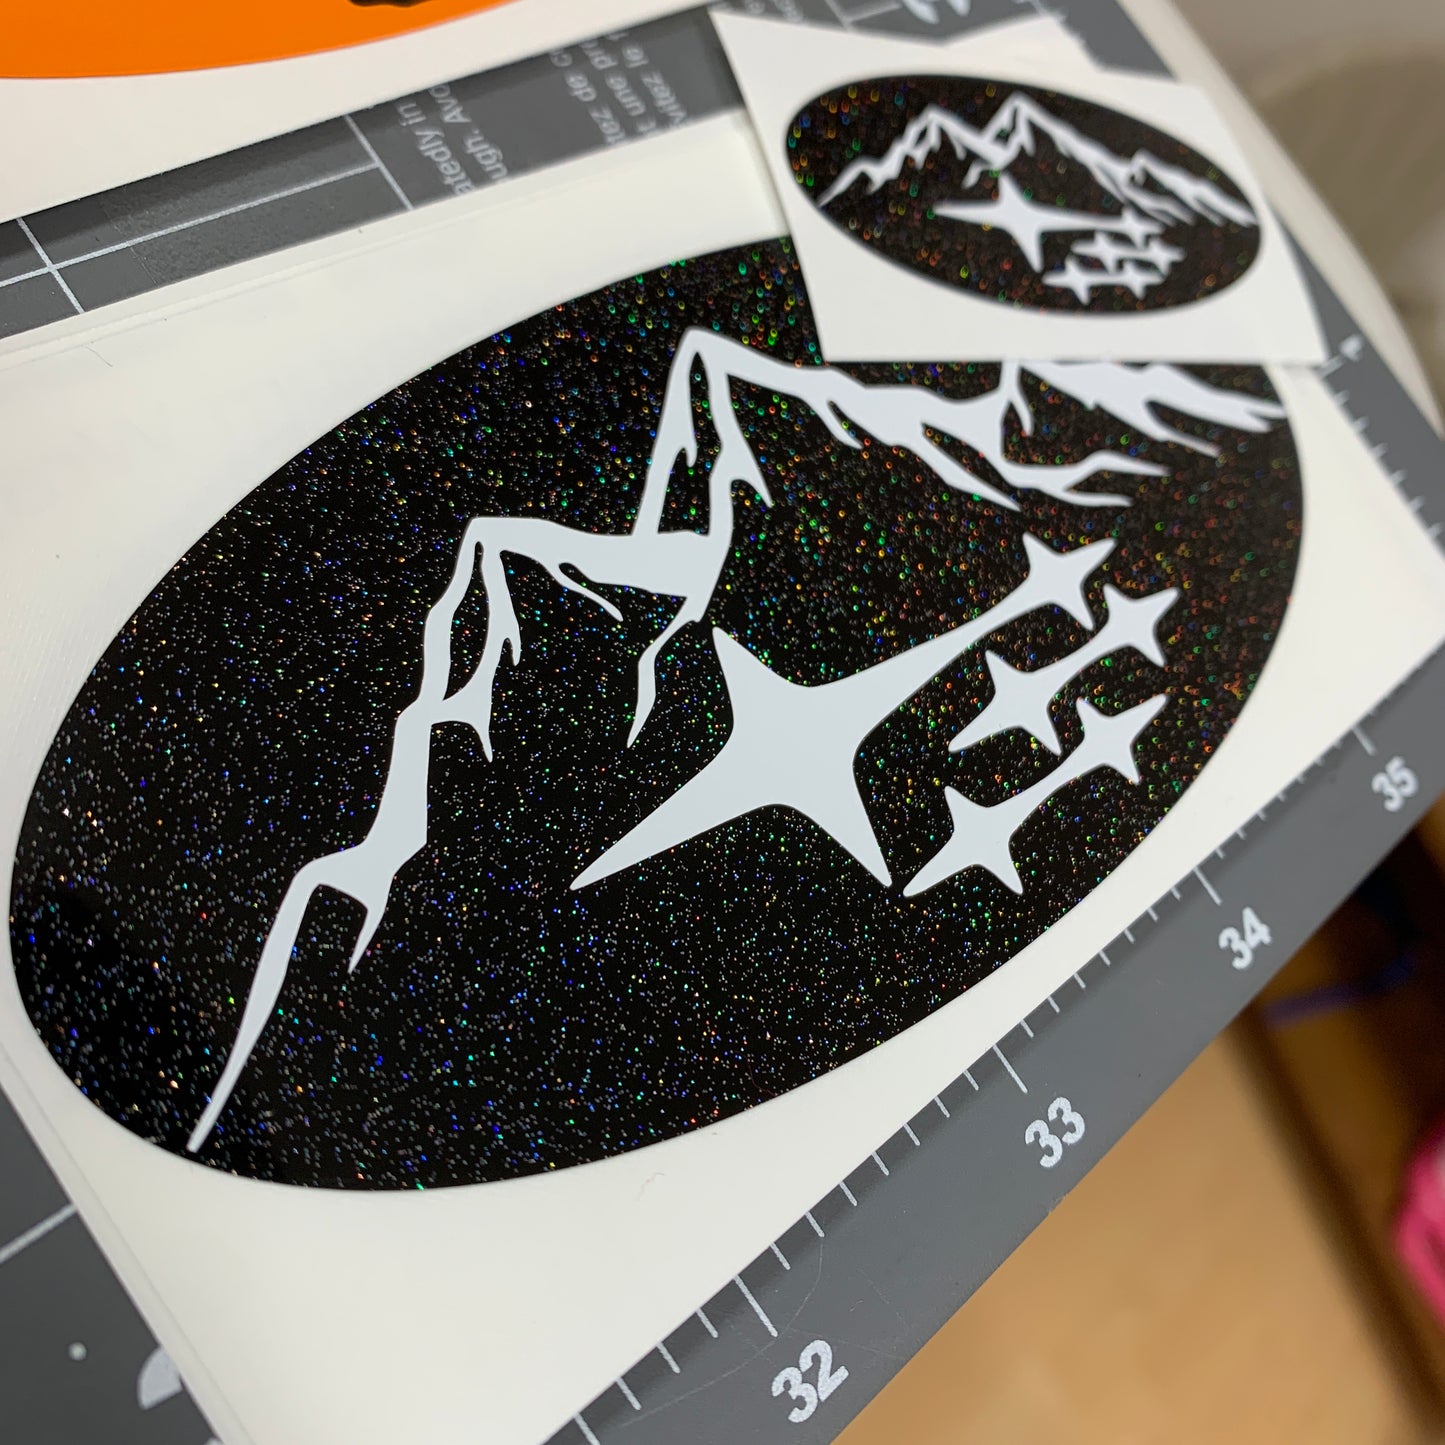 Mountain Outline #1 with Stars Emblem Overlay Decal Set